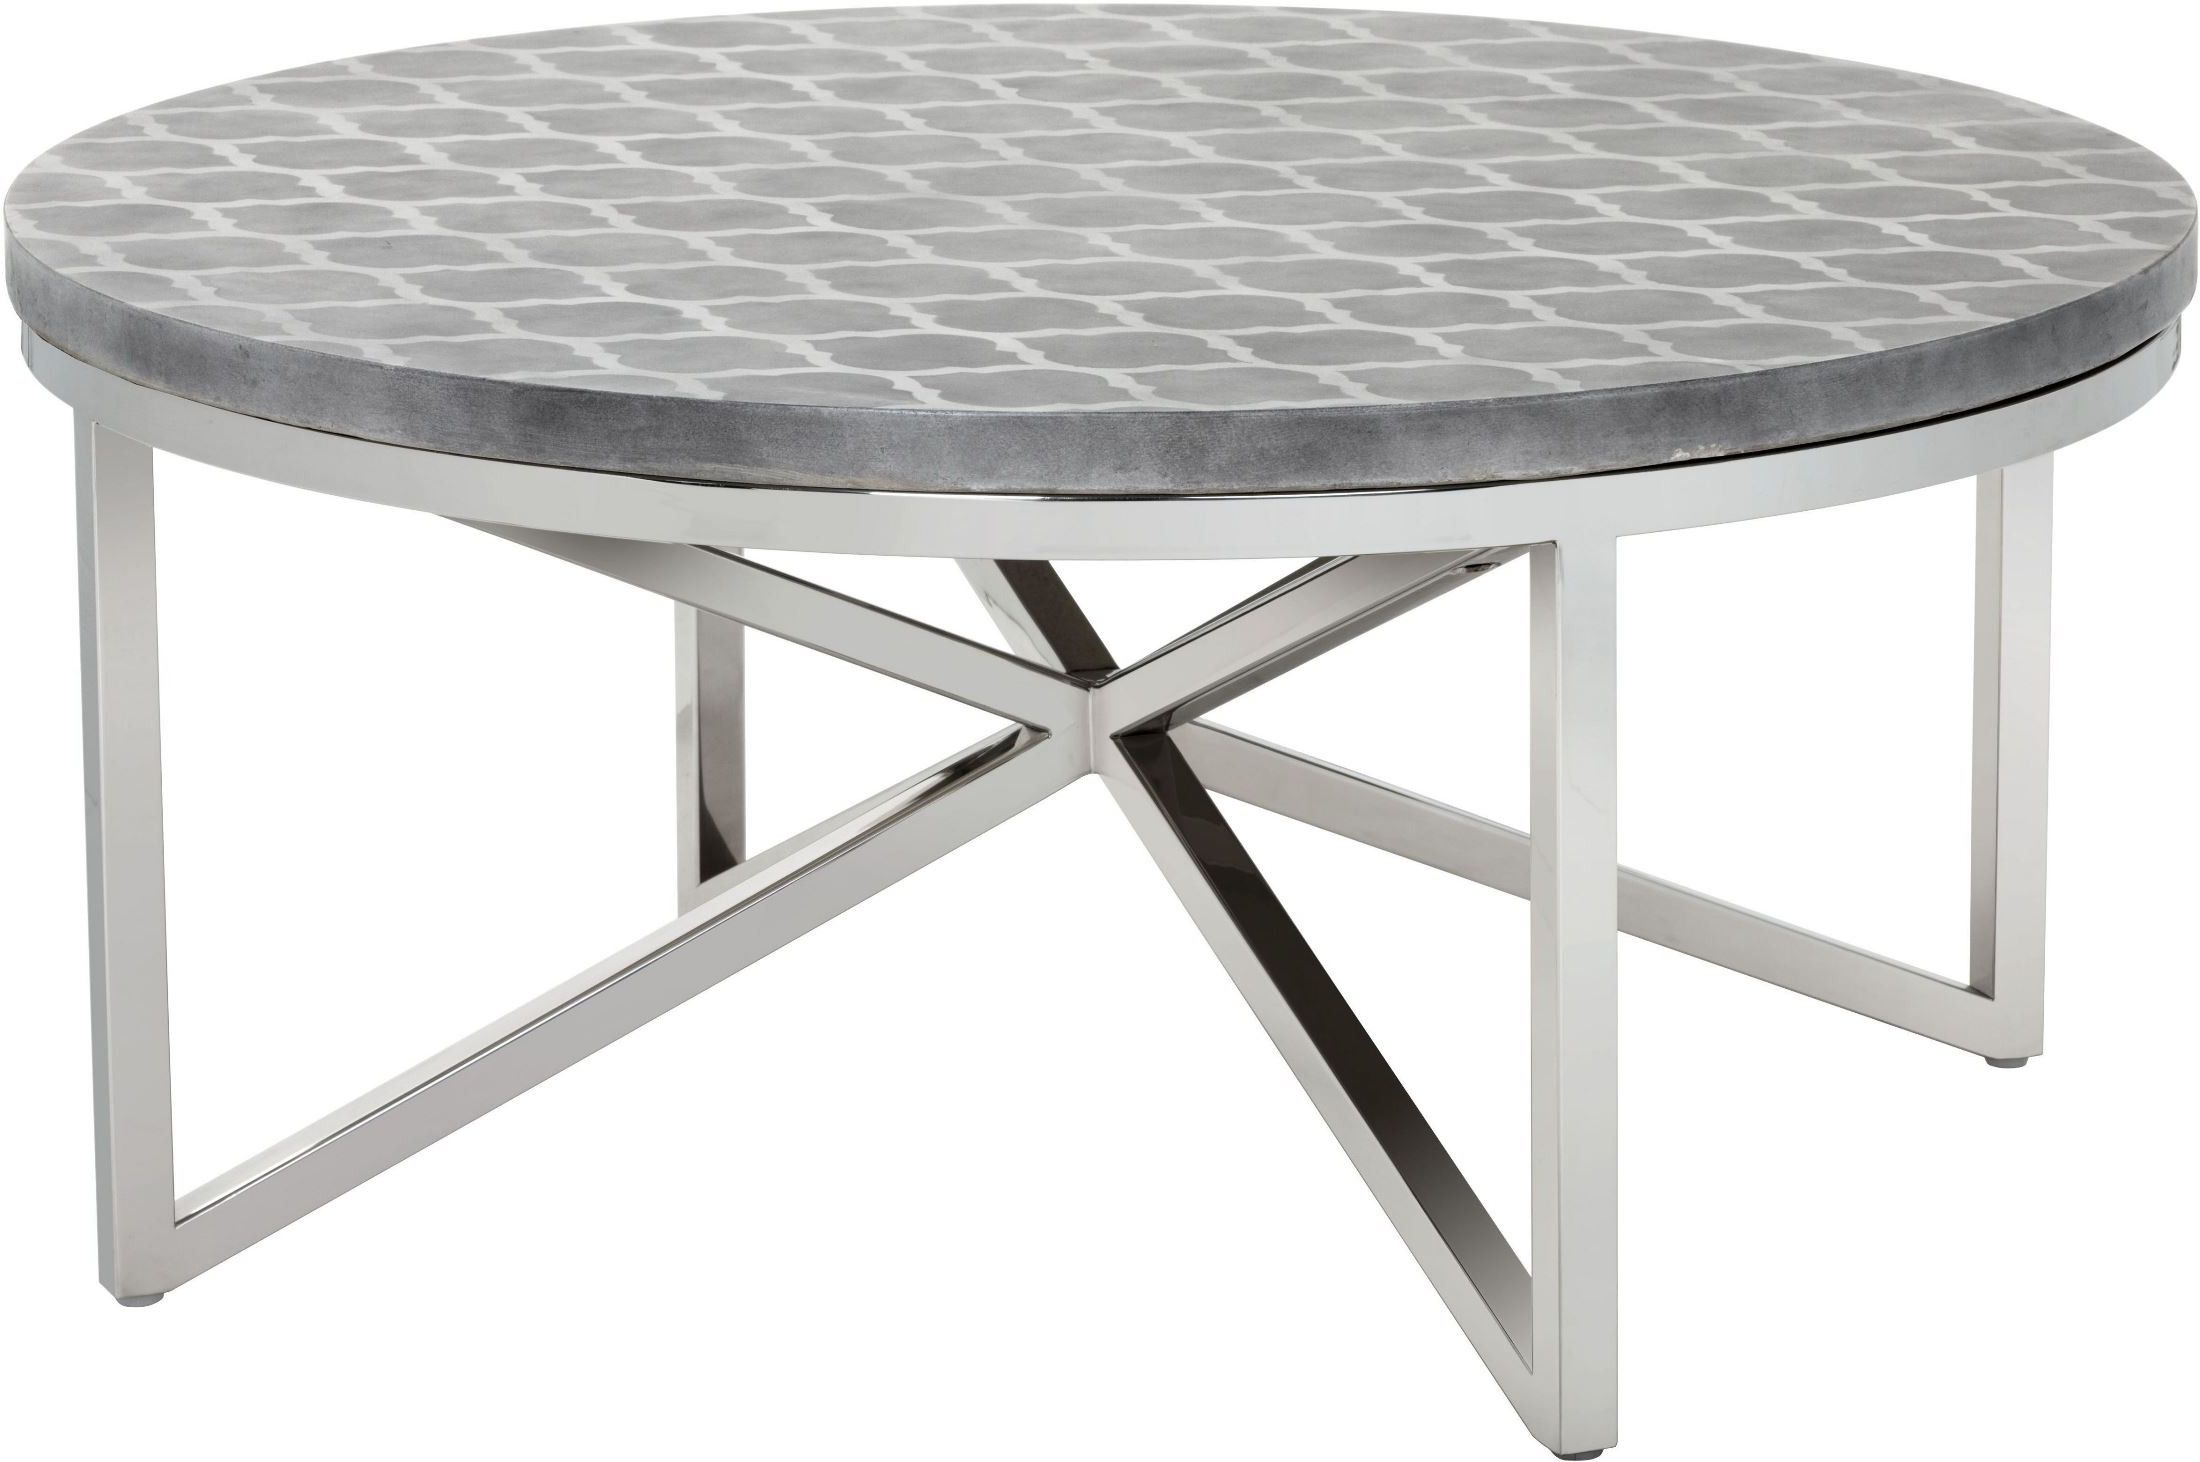 Dion Stencil Geometric Coffee Table, 101431, Sunpan Modern Within Most Recent Geometric White Coffee Tables (View 15 of 20)